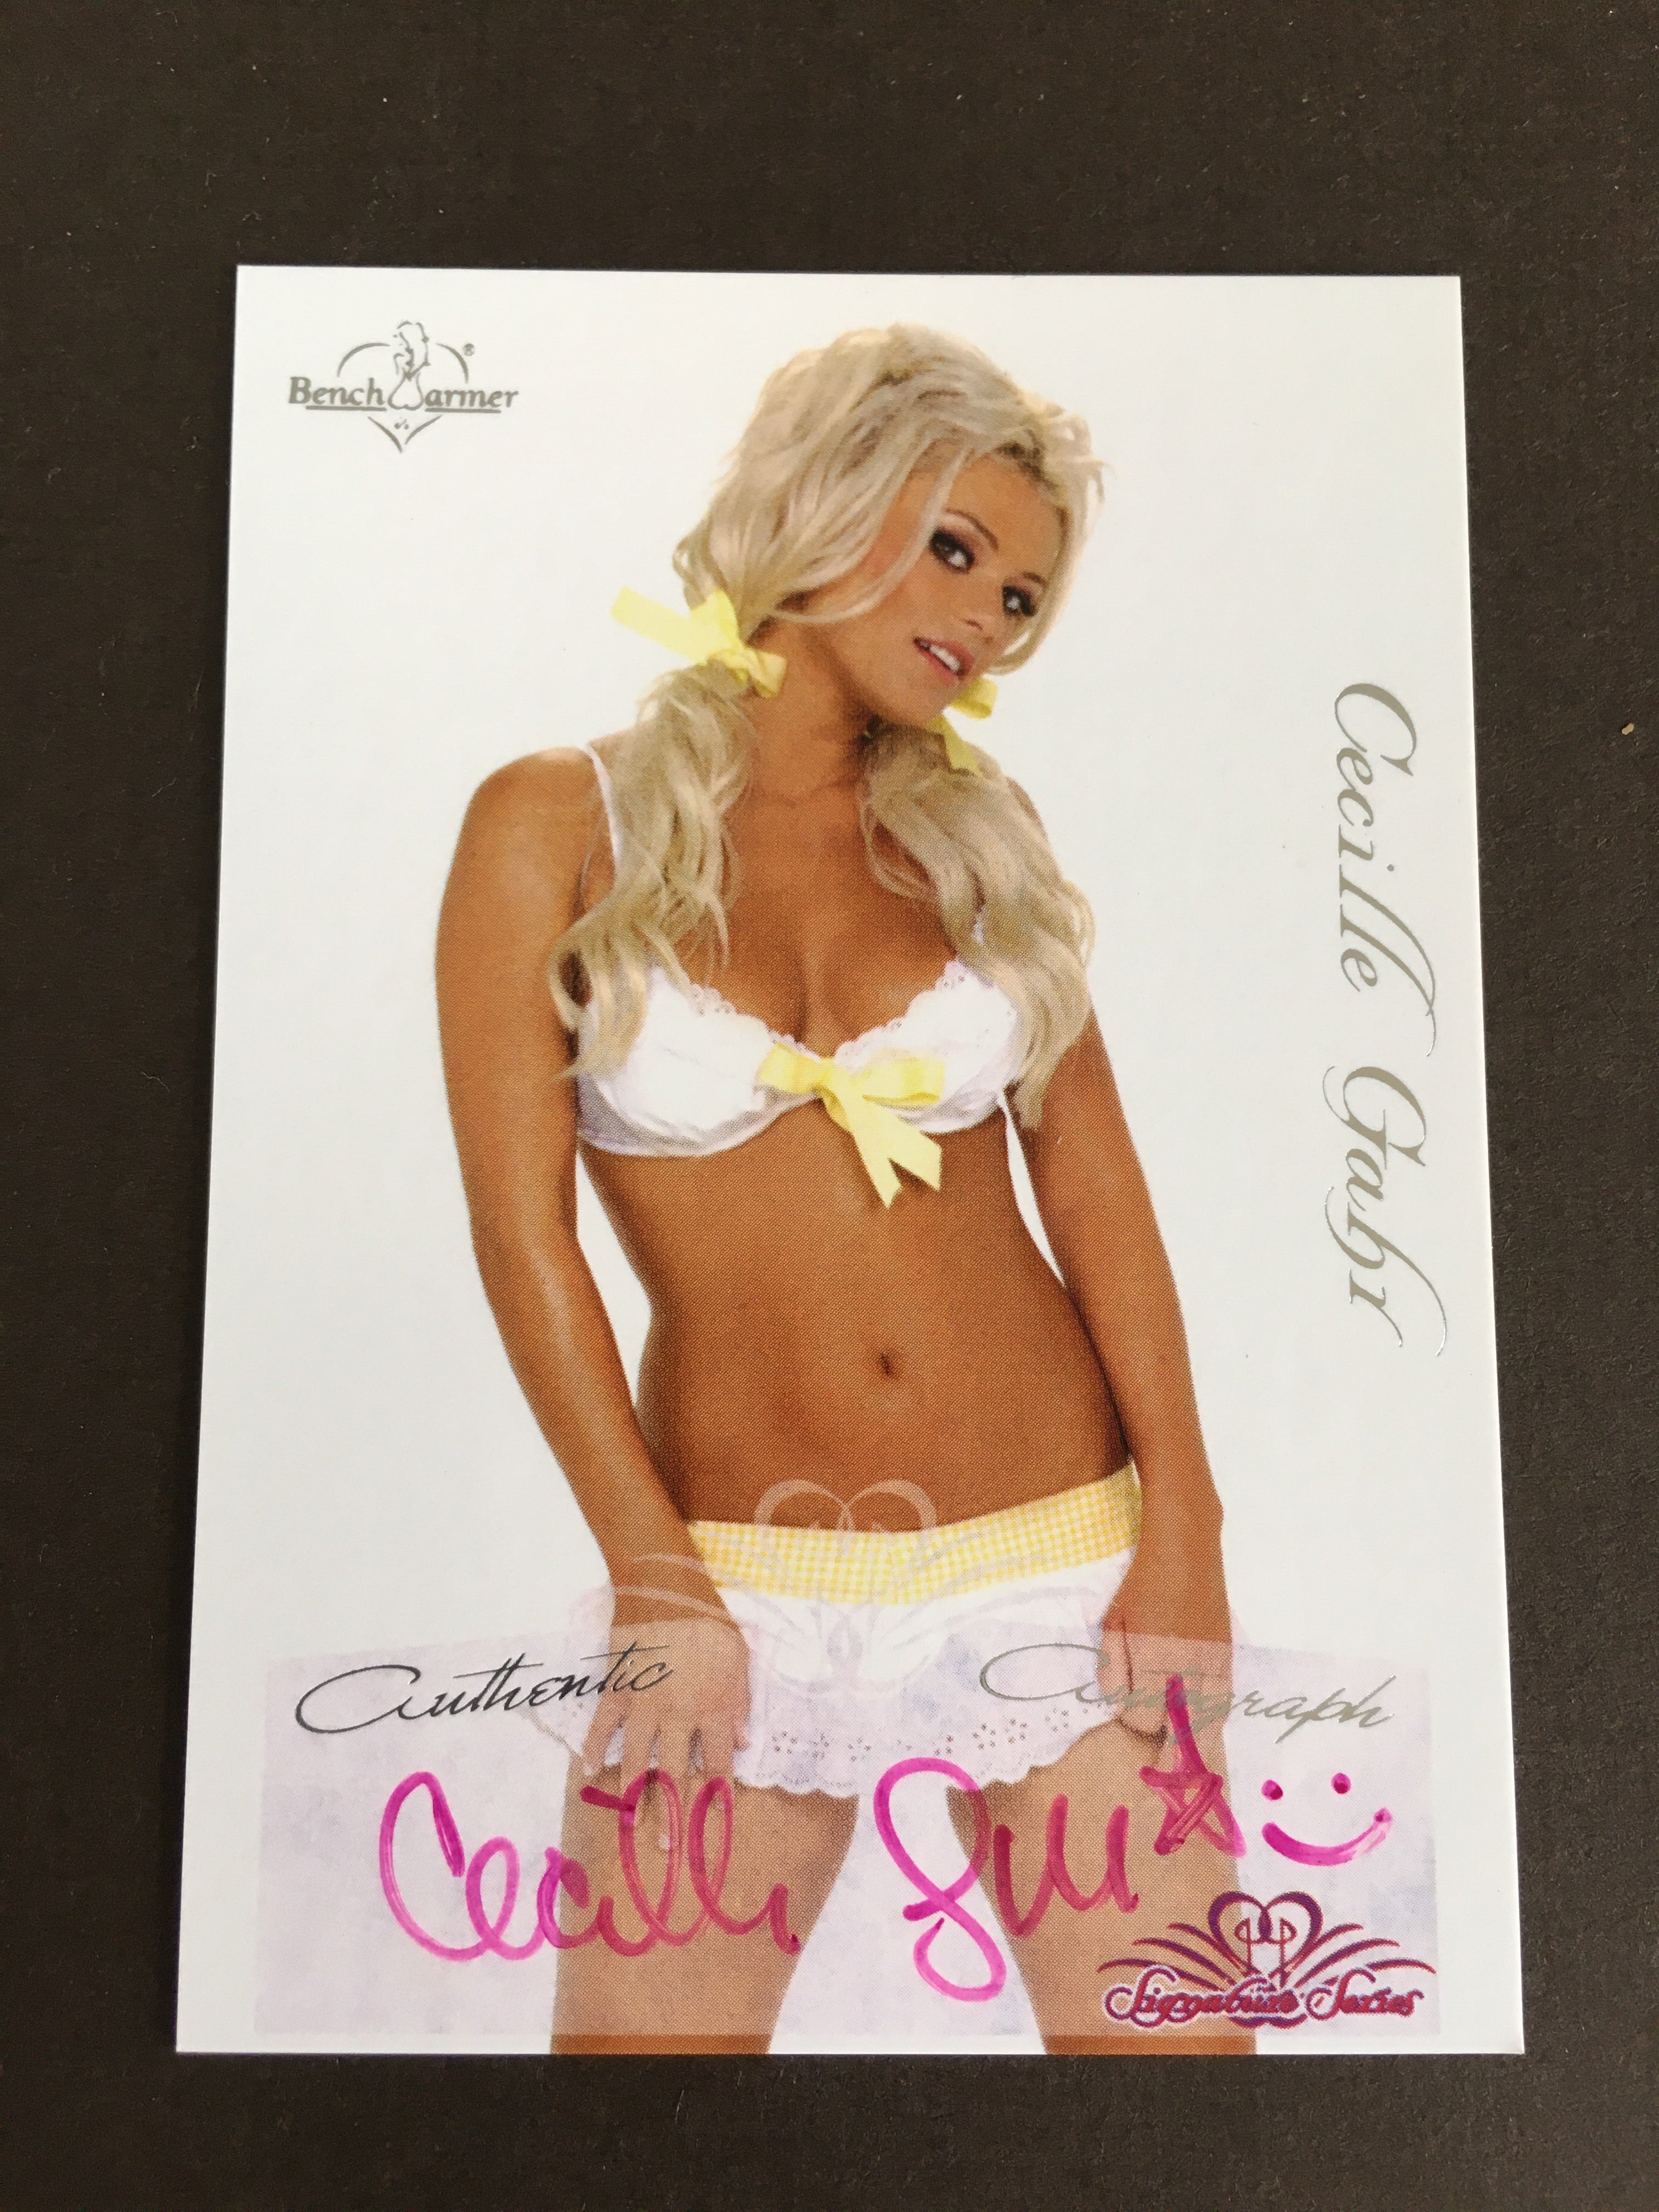 Cecille Gahr - Autographed Benchwarmer Trading Card (1)